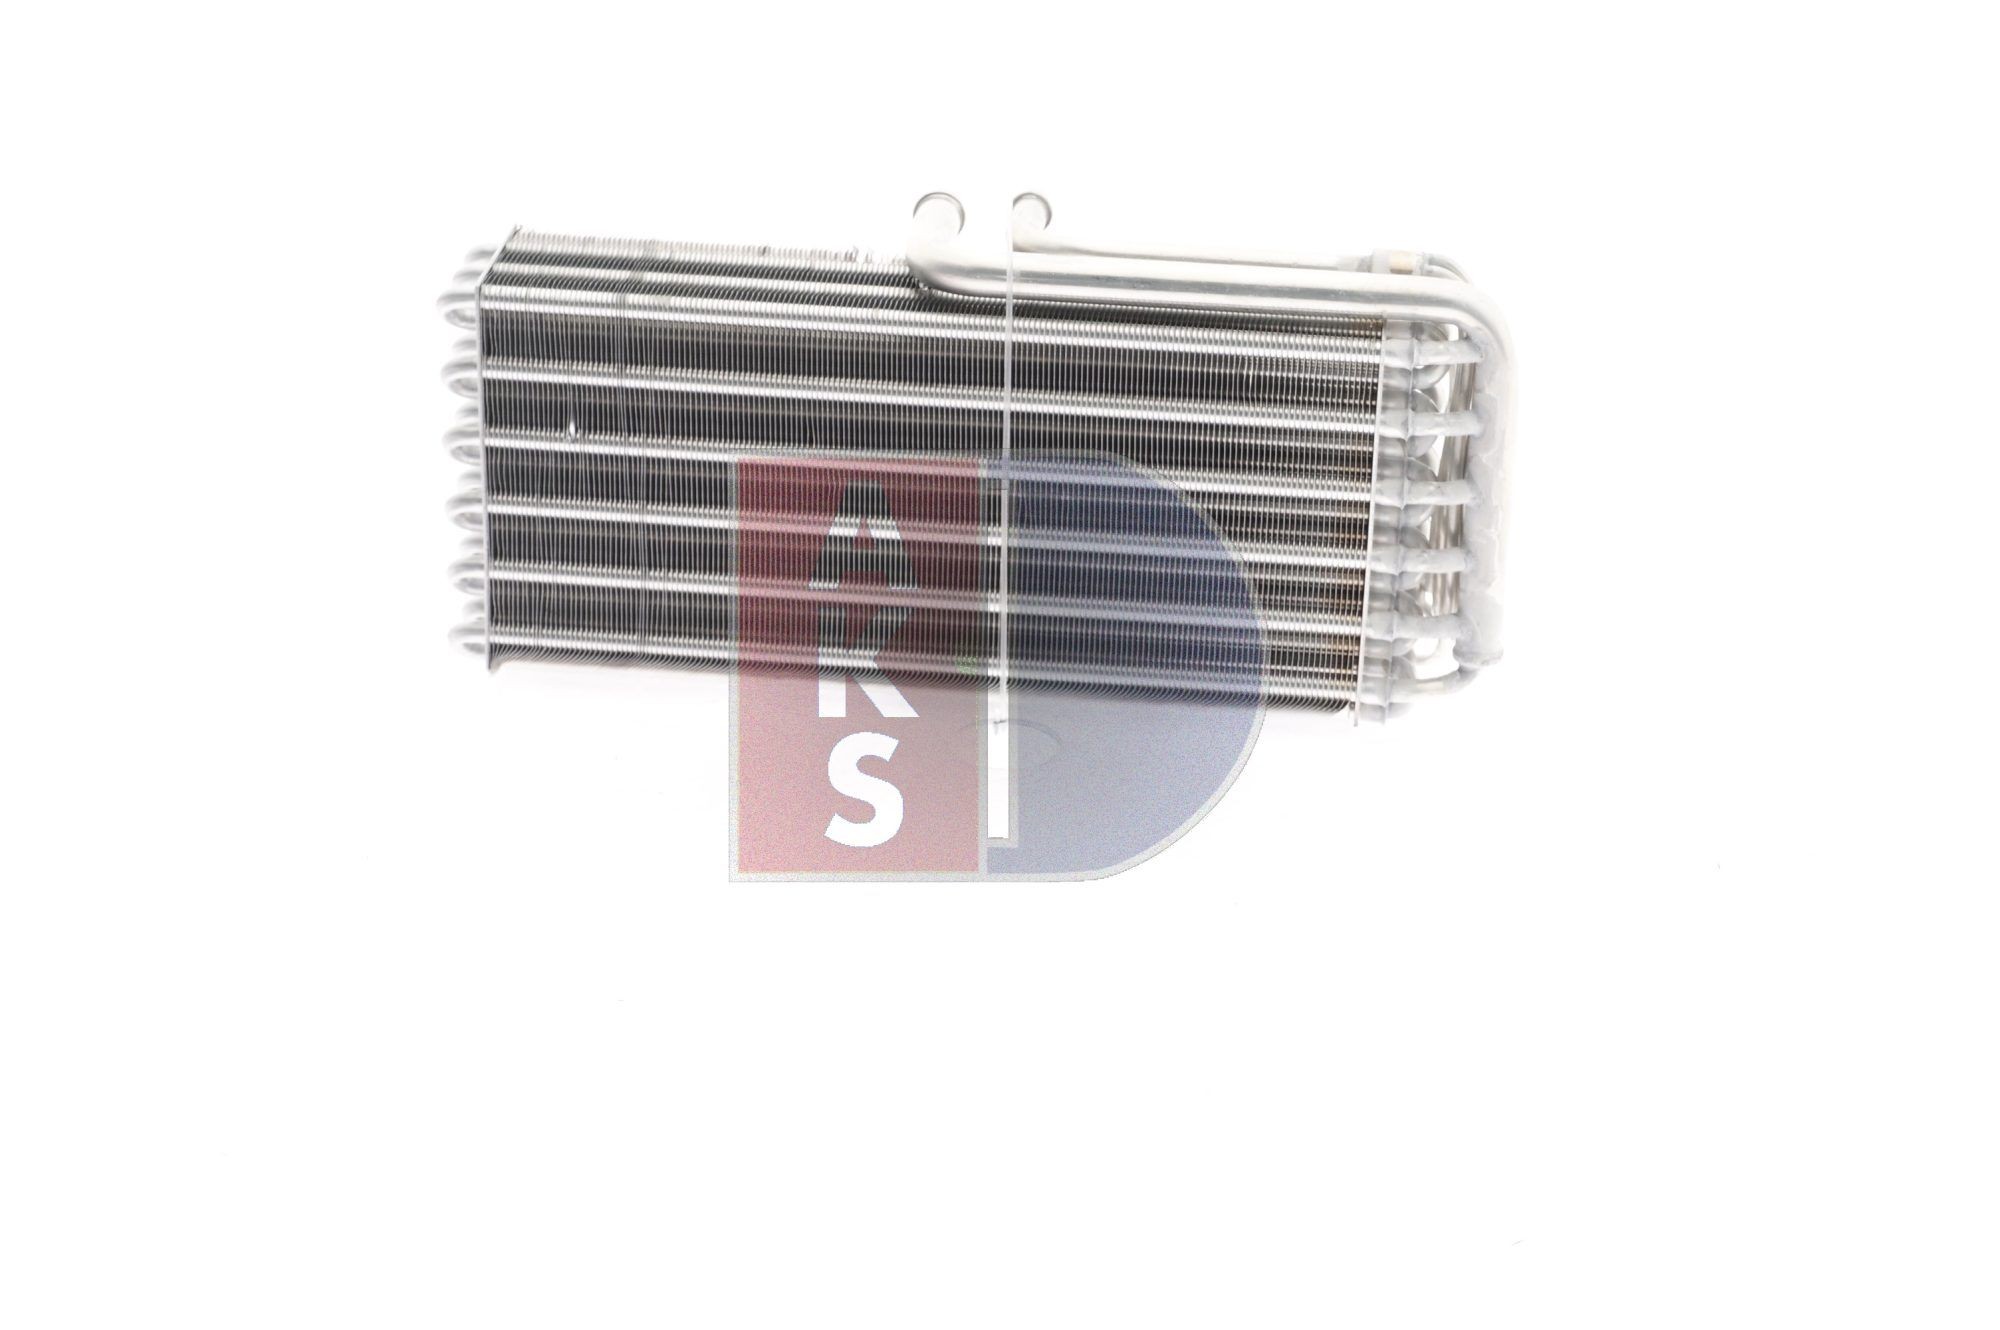 820970N Air conditioning evaporator AKS DASIS 820970N review and test